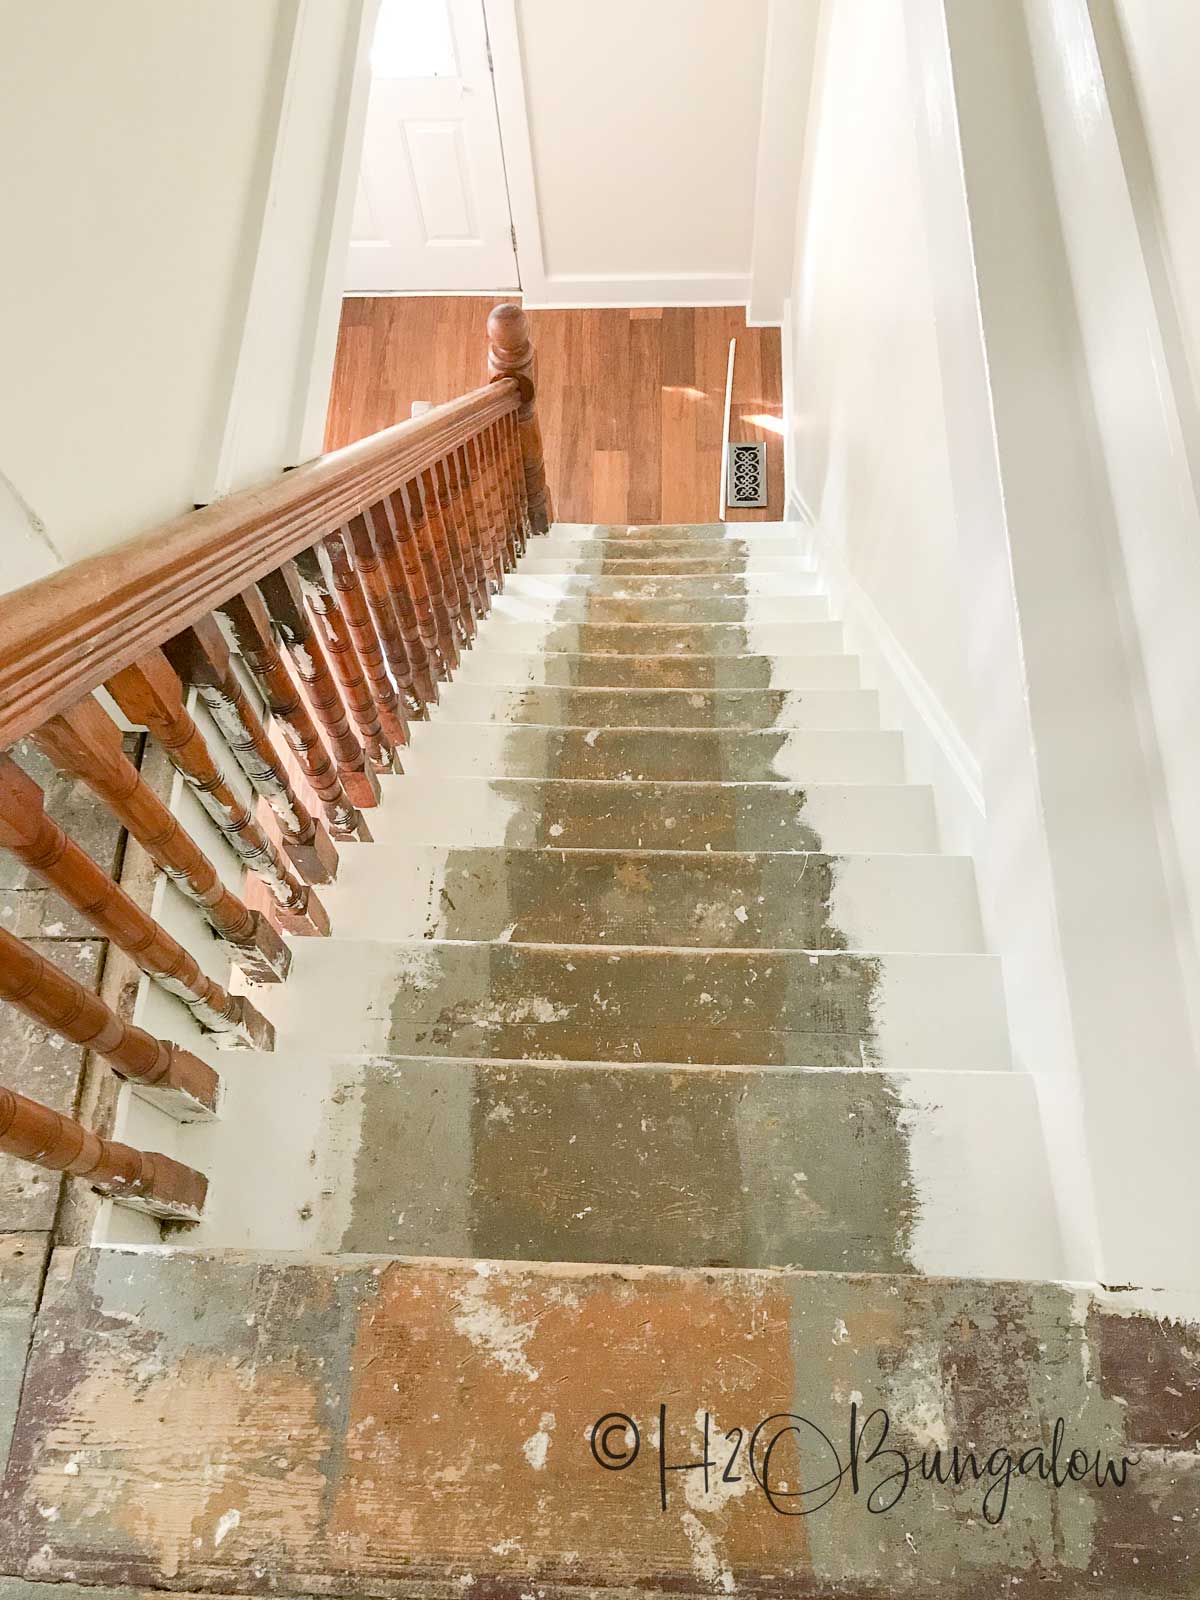 How To Install Carpet Runner On Stairs H2obungalow